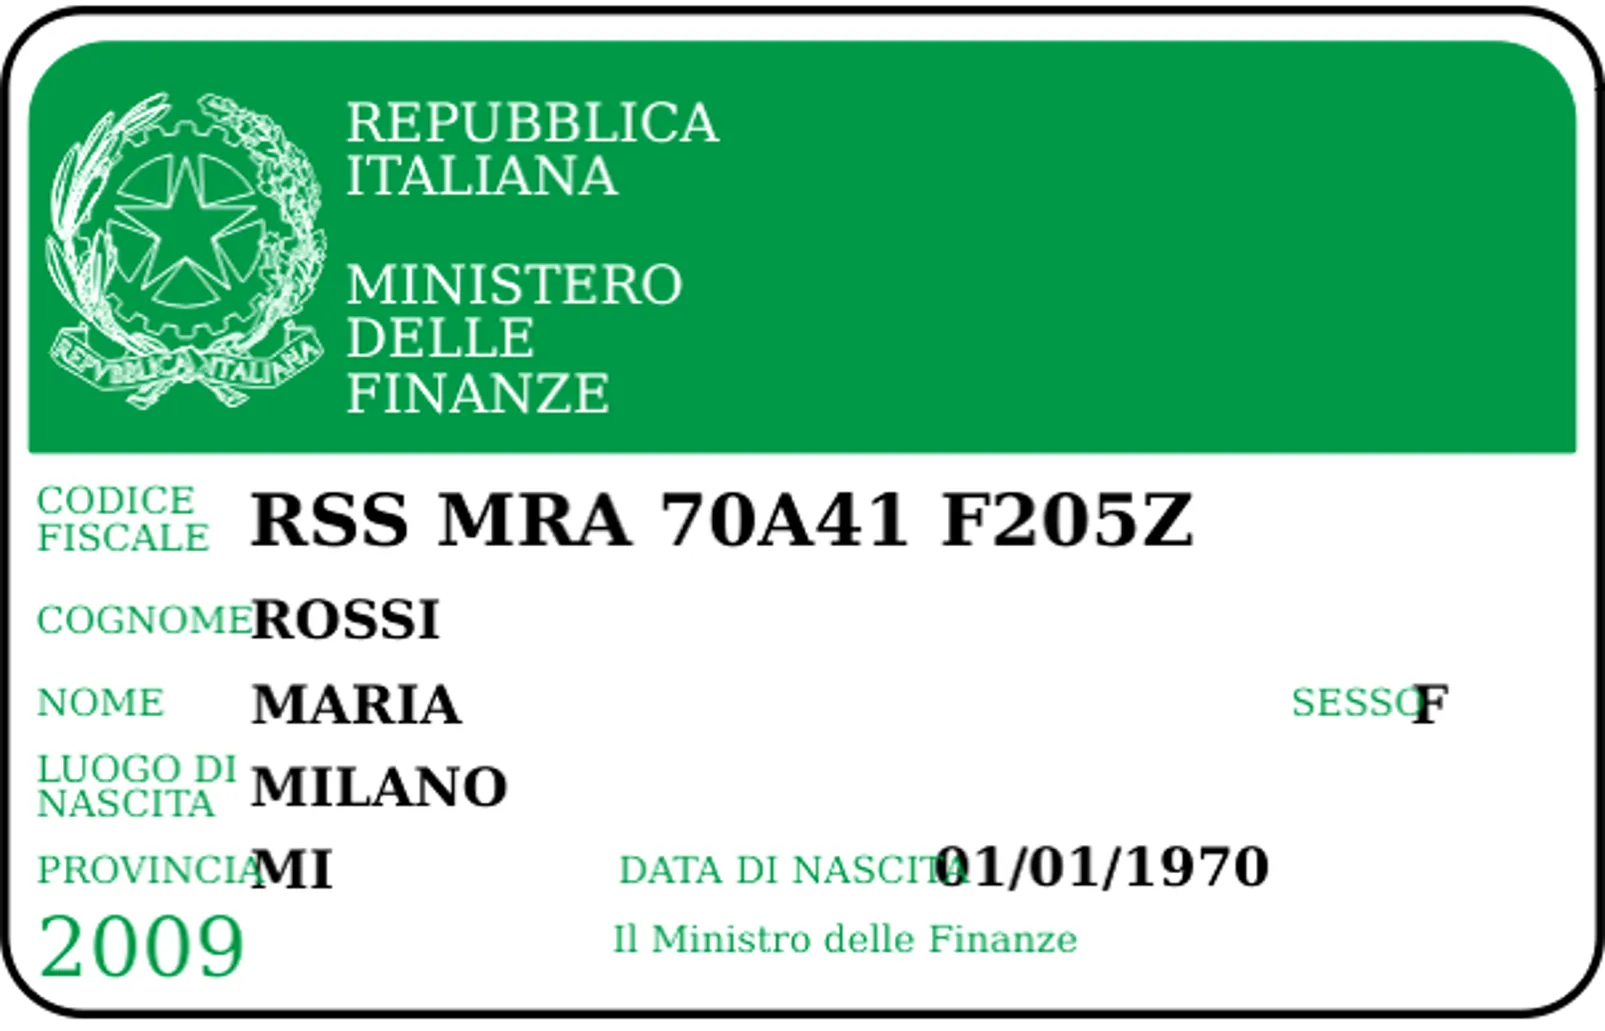 Example of a Codice Fiscale Card